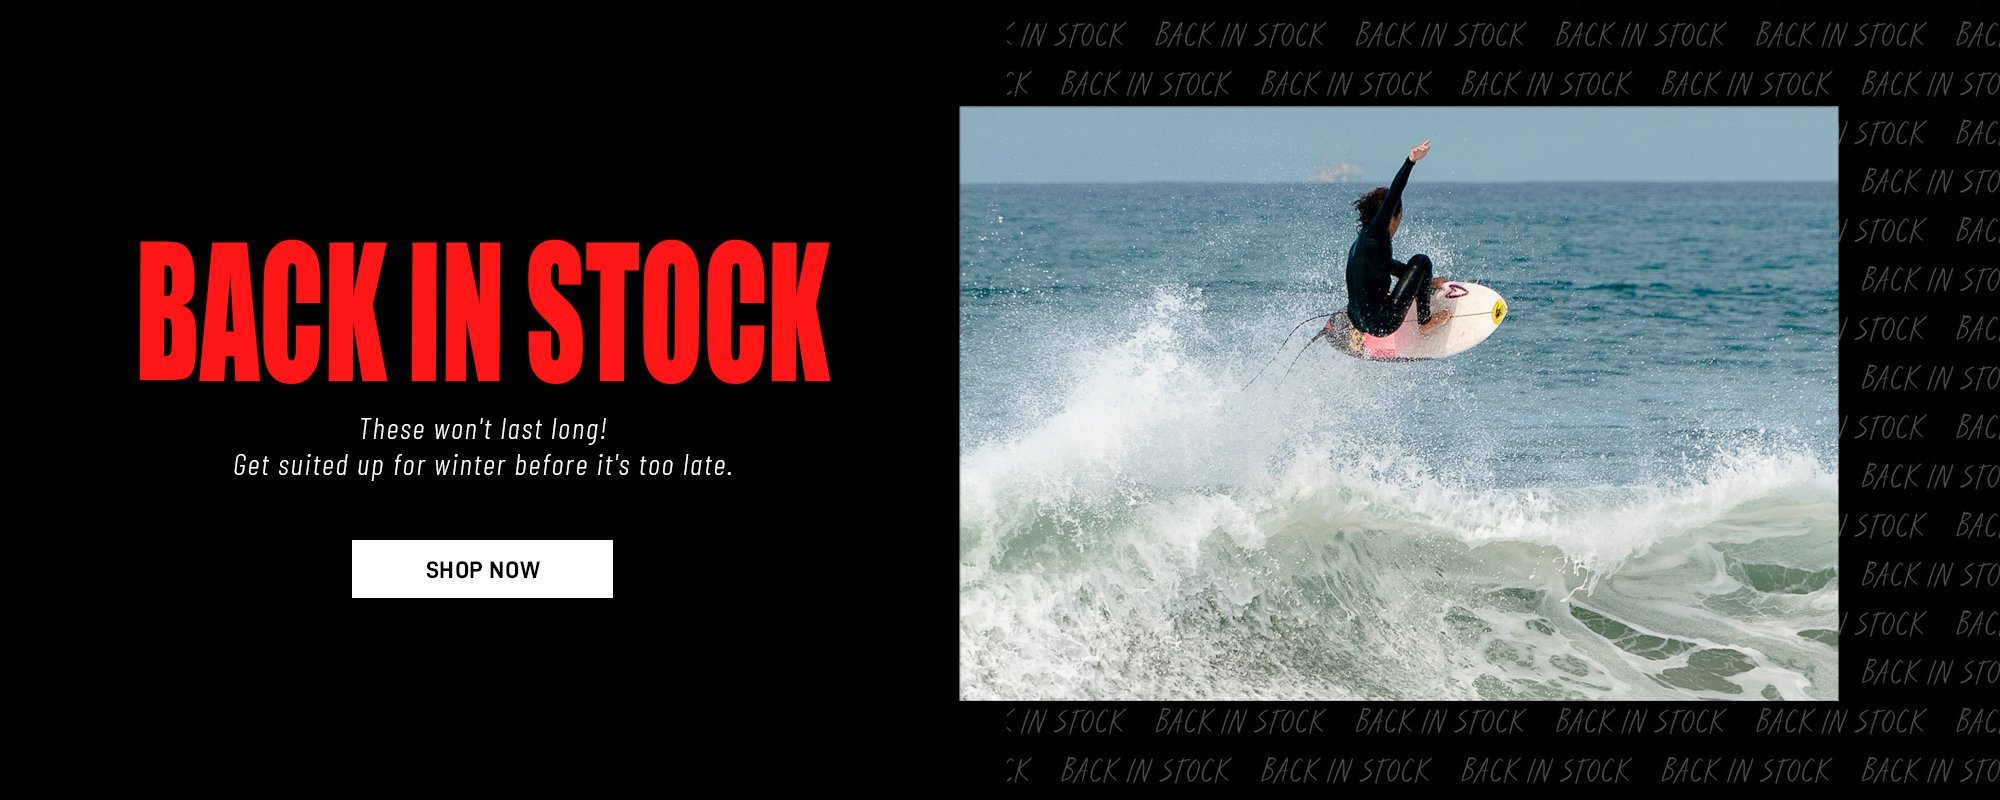 Wetsuits - back in stock - these won't last long - get suited up for winter before it's too late - Shop Now